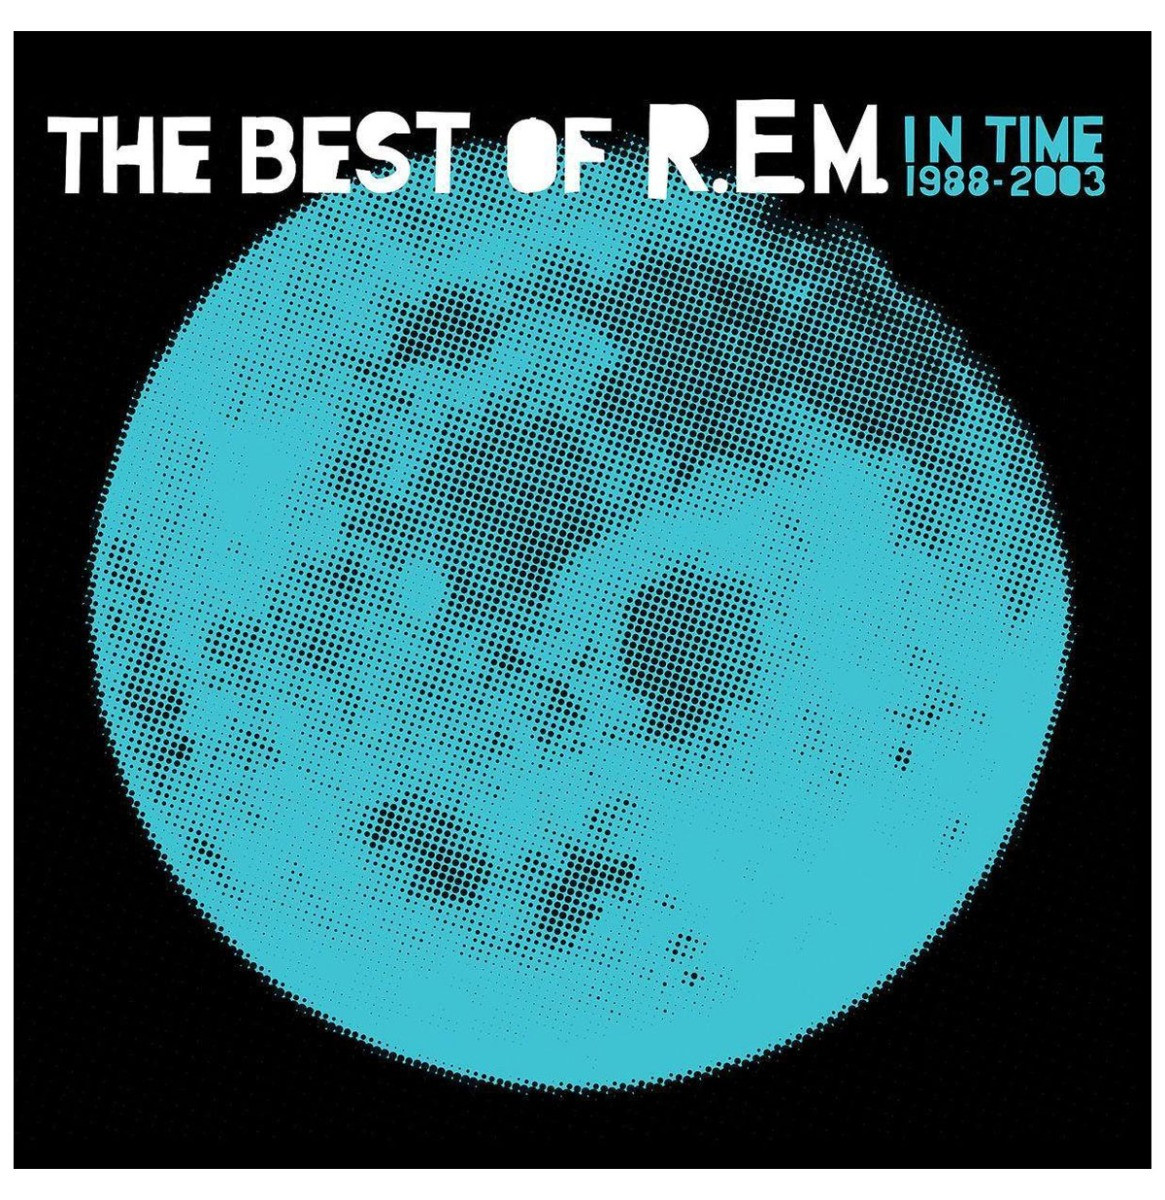 The Best Of R.E.M. - In Time 1988-2003 - 2-LP